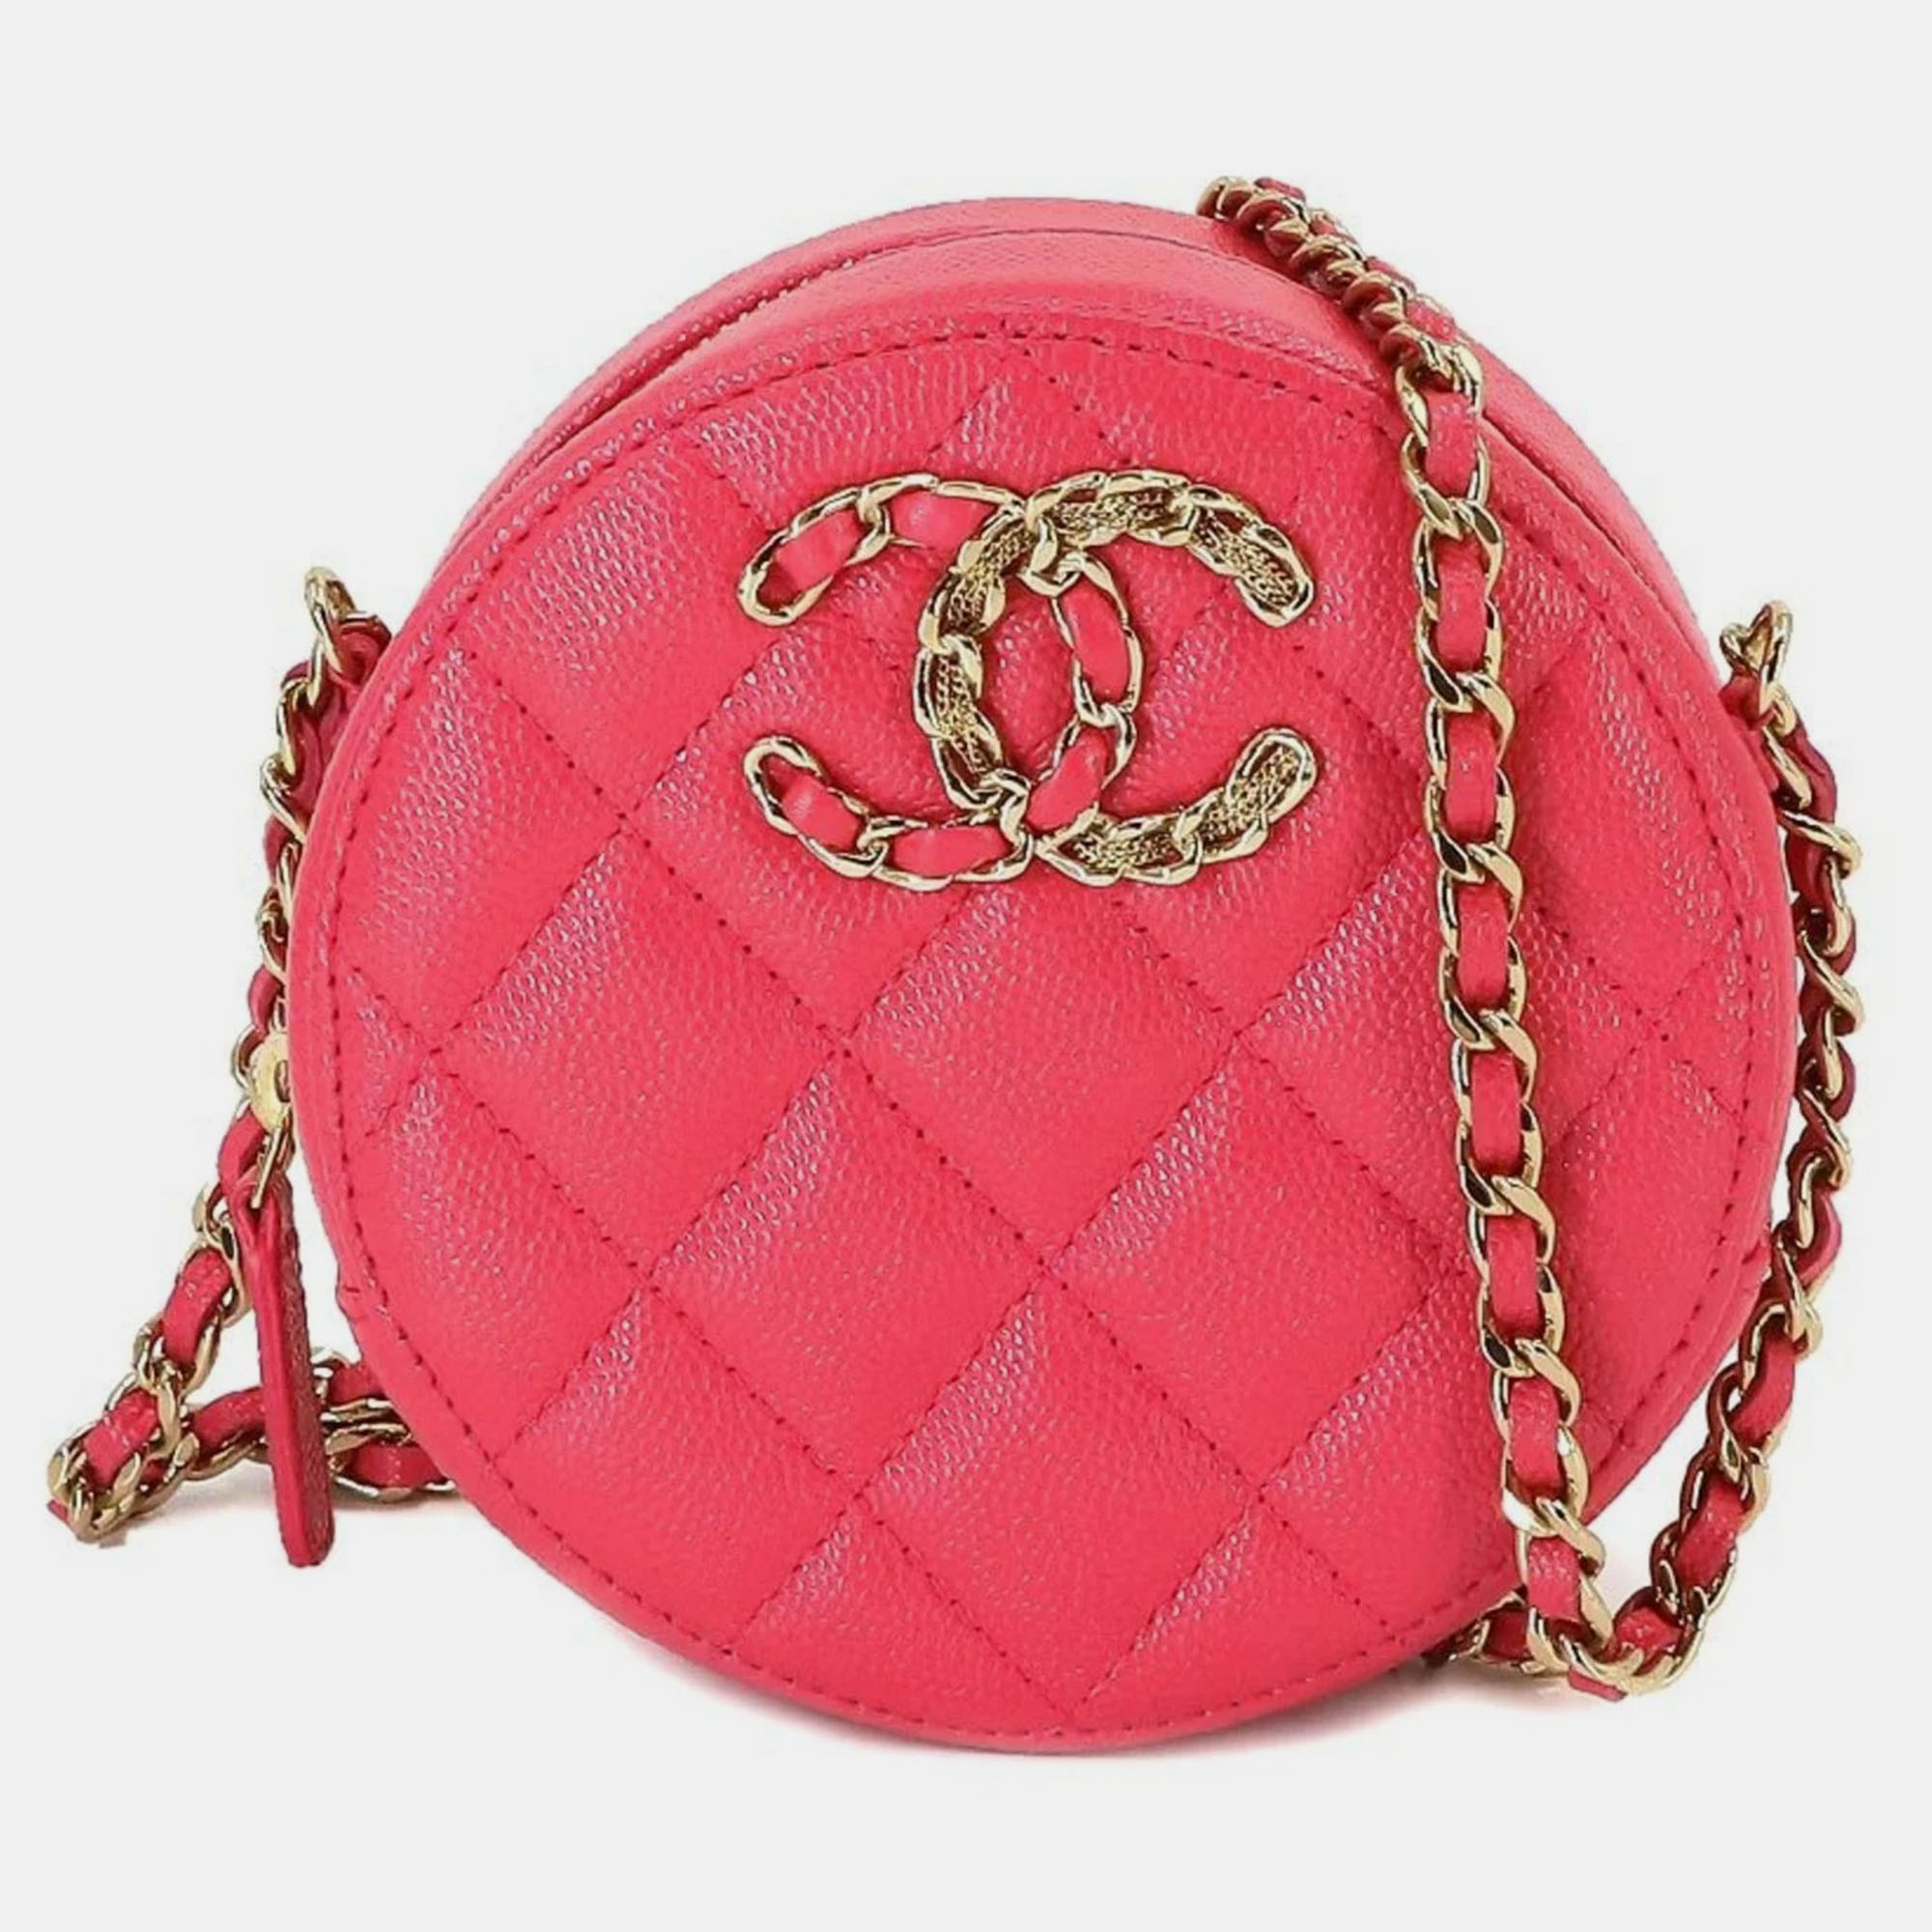 Chanel pink leather round 19 clutch with chain